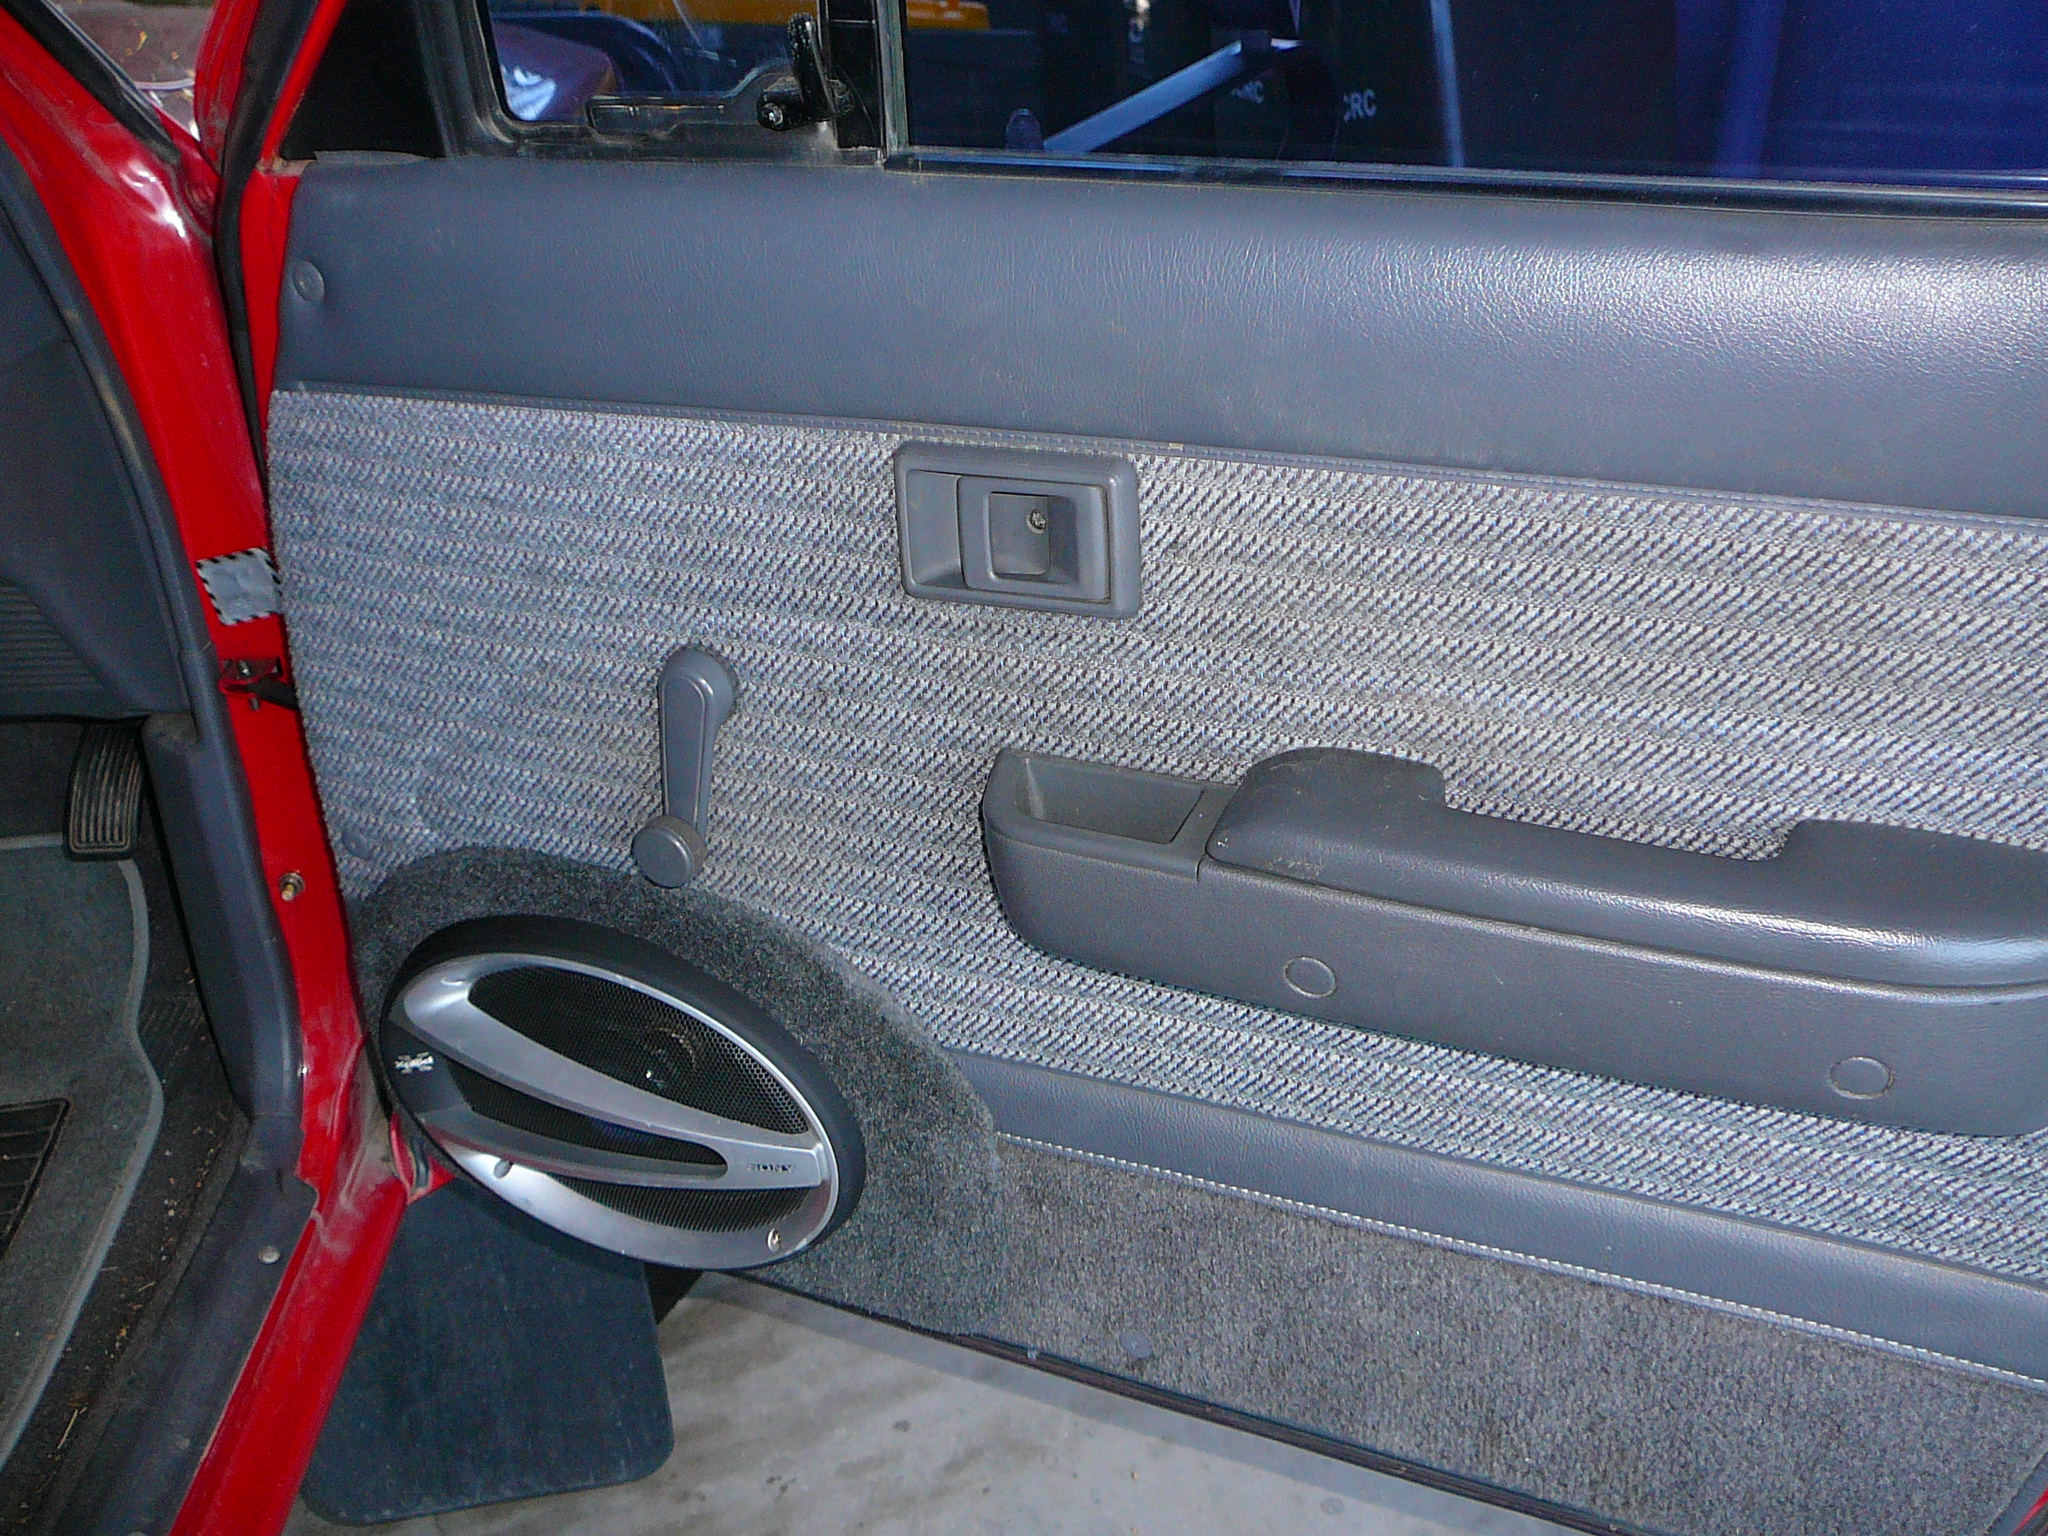 Toyota Hilux, 6×9 front doors with spacers